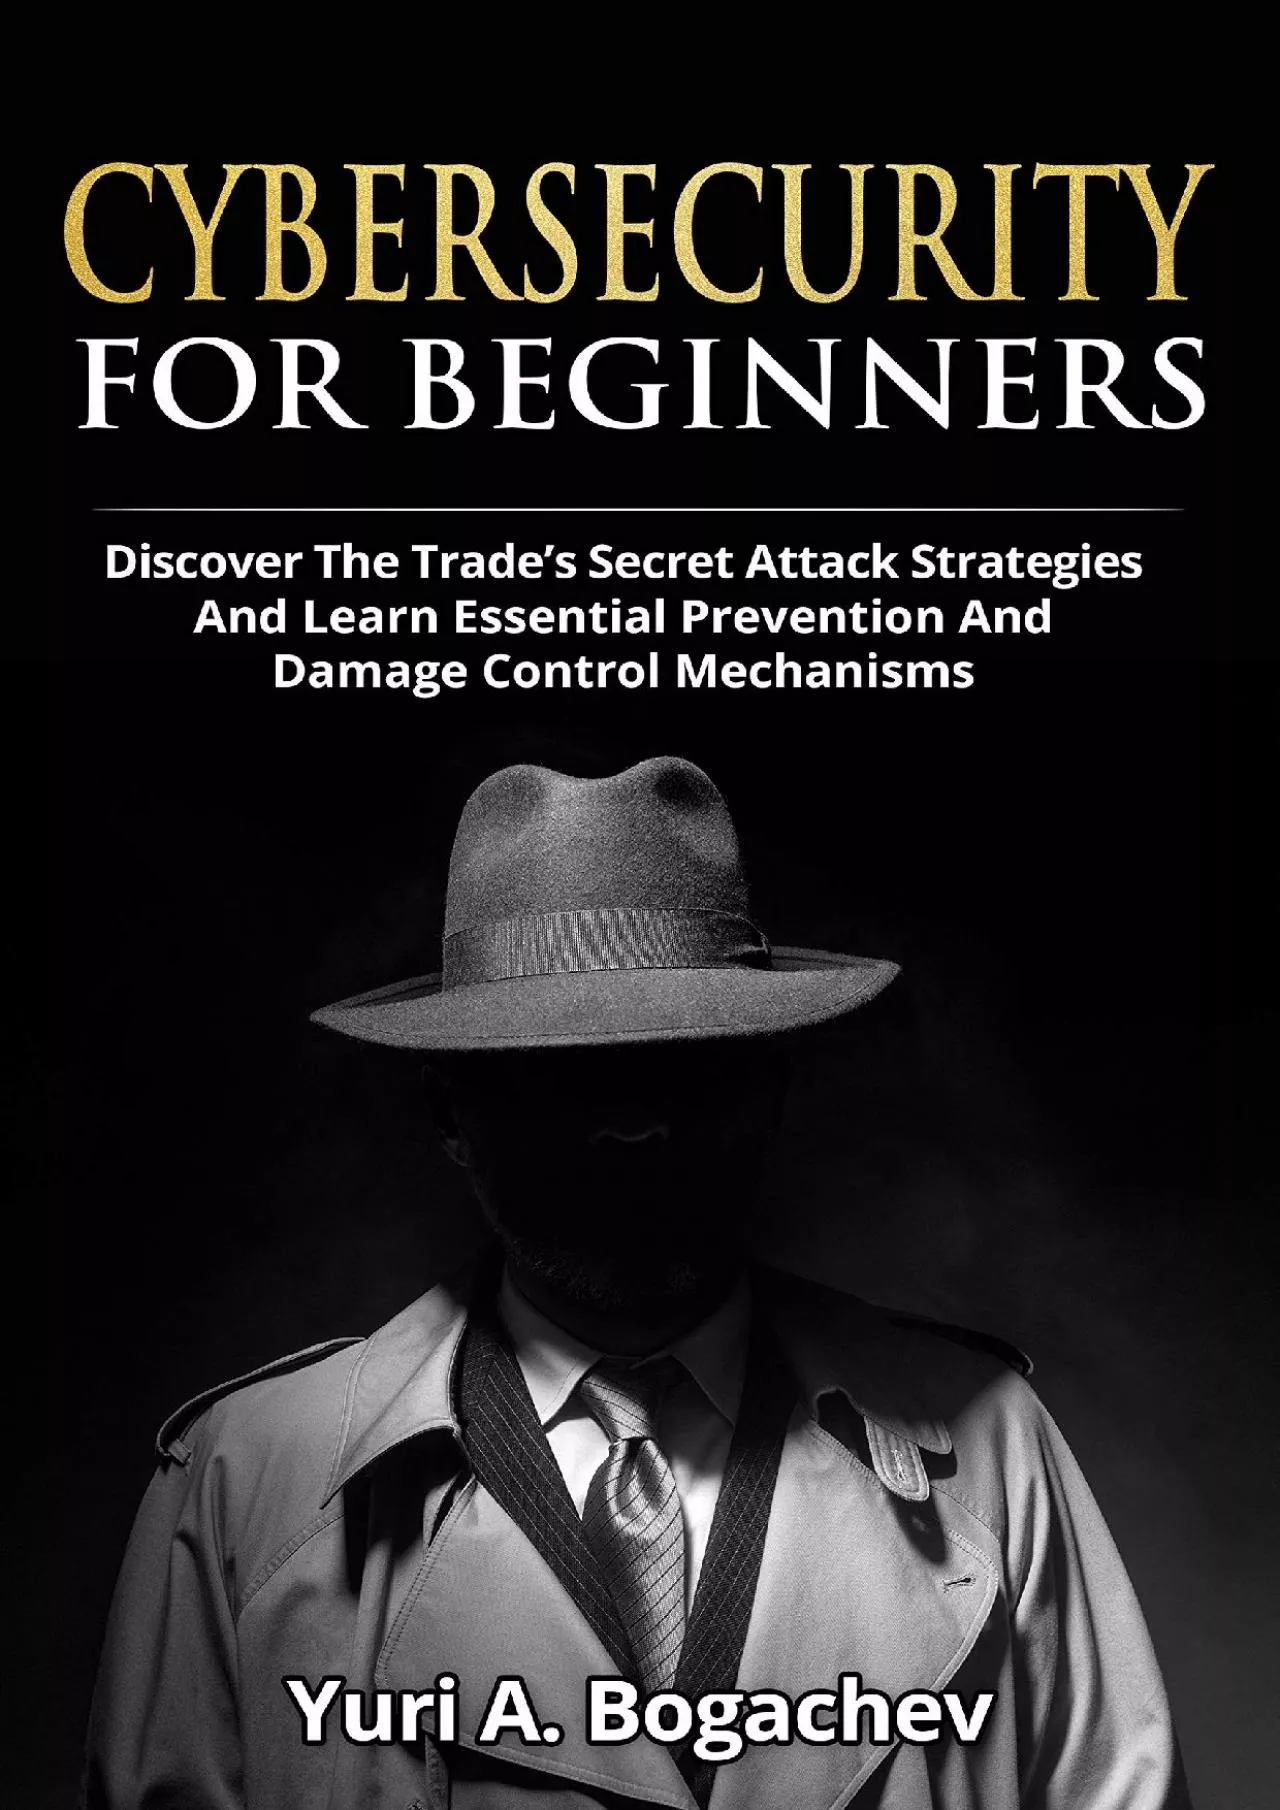 (BOOK)-Cybersecurity For Beginners : Discover the Trade’s Secret Attack Strategies And